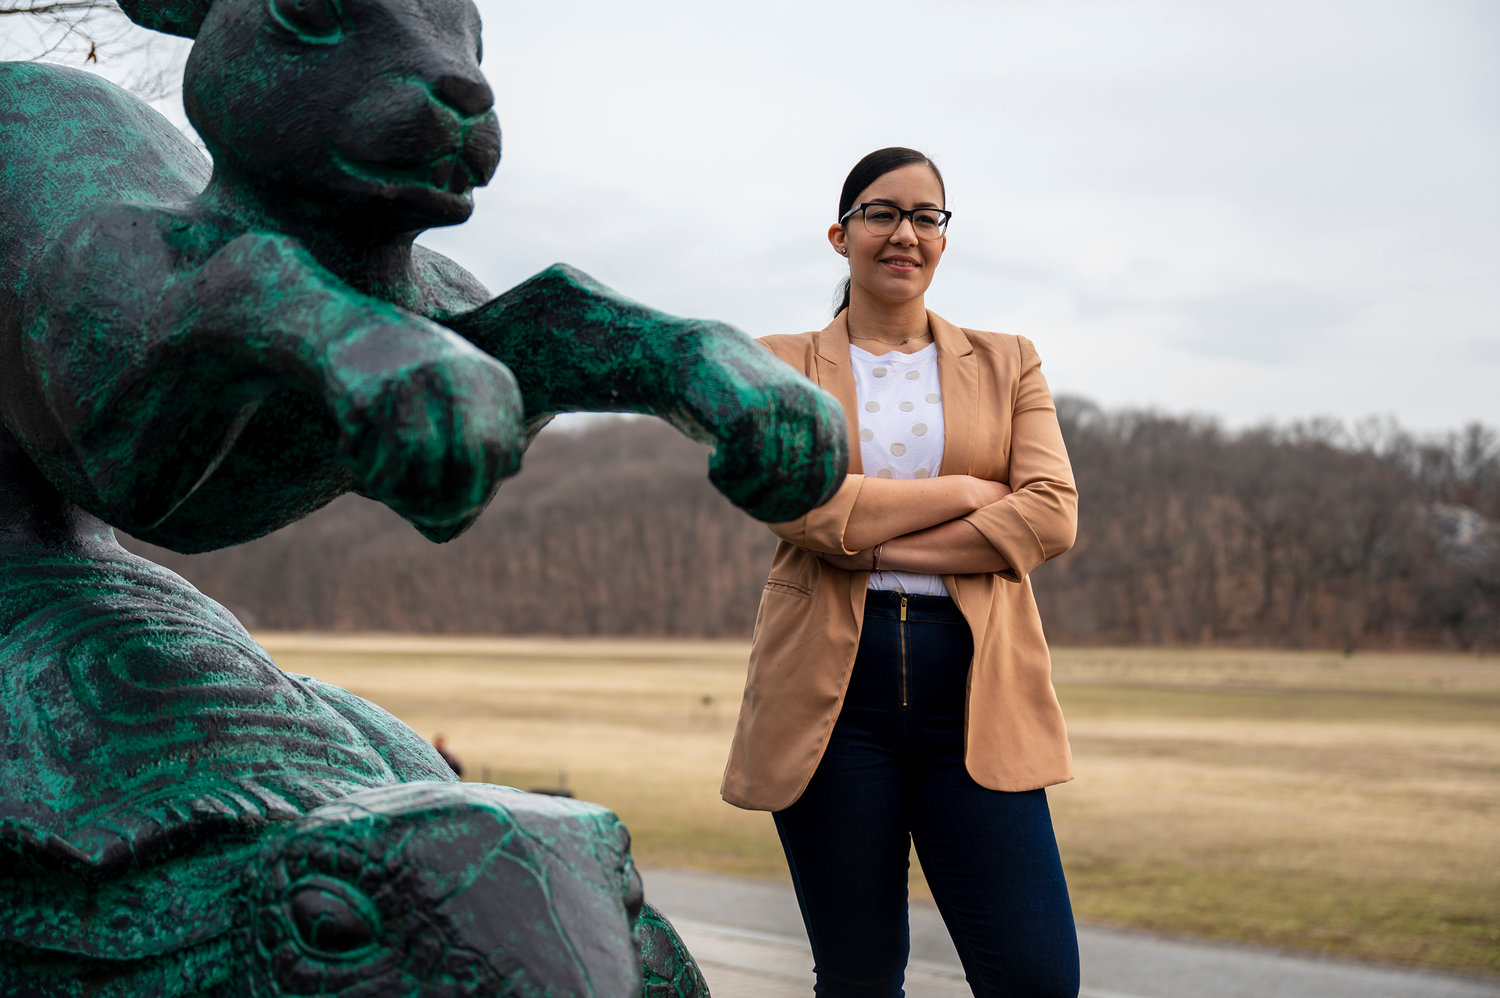 Miguelina Camilo stands for a portrait near the Tortoise & Hare sculpture at Van Cortlandt Park earlier this year. She got the Bronx Democratic Party's endorsement in the senate's newly drawn 33rd district.